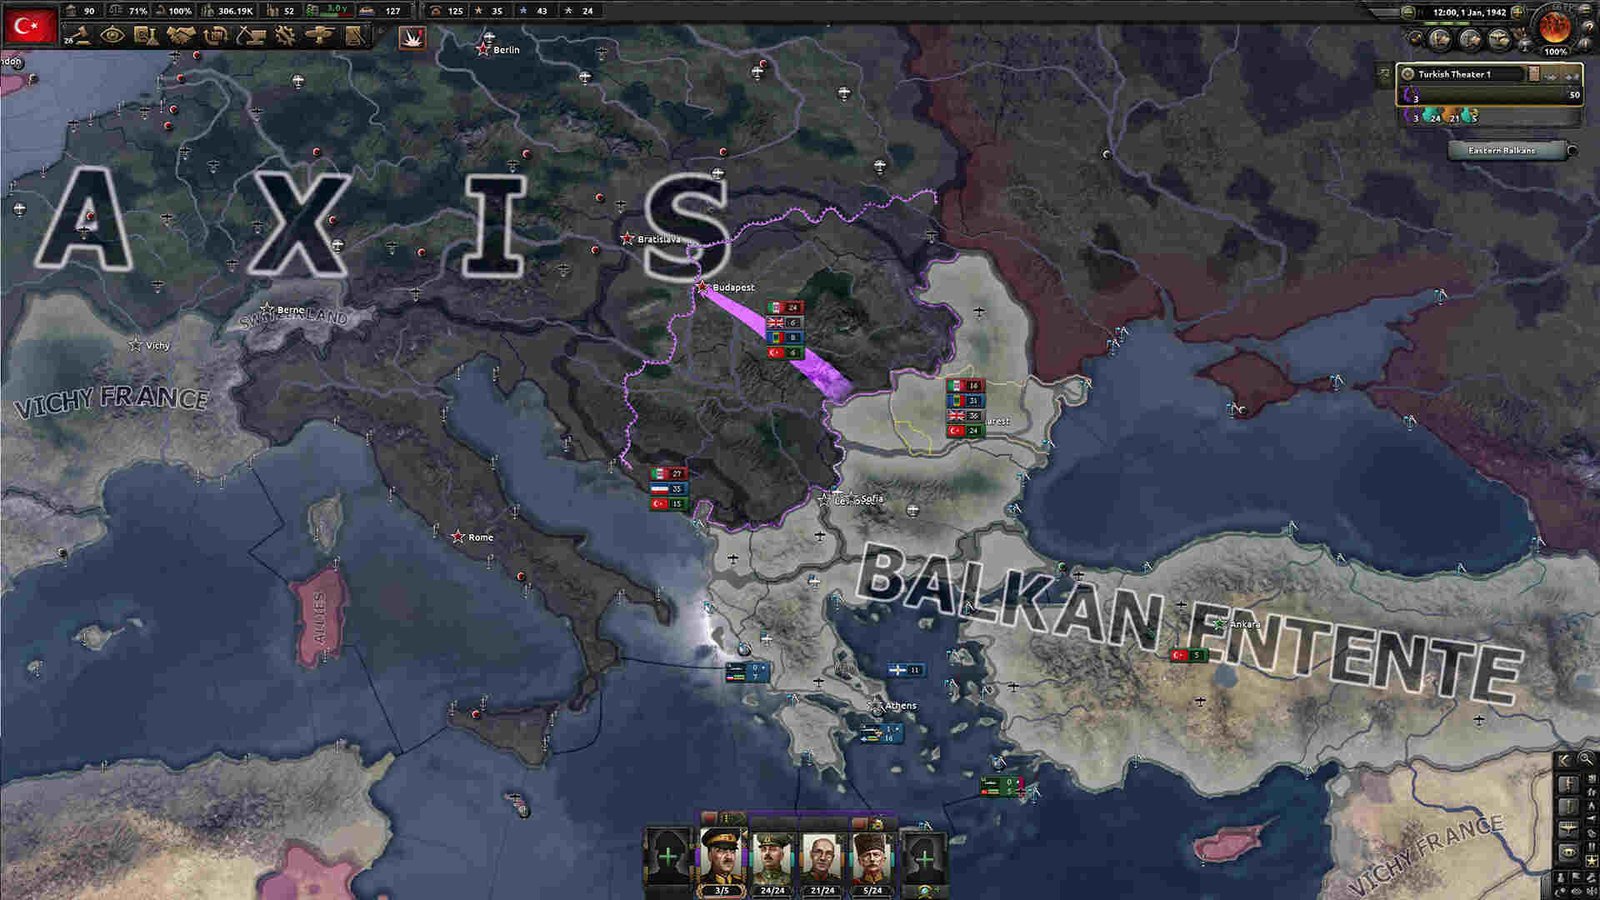 Hearts of Iron 5 Release Date Predictions: When is it coming out?